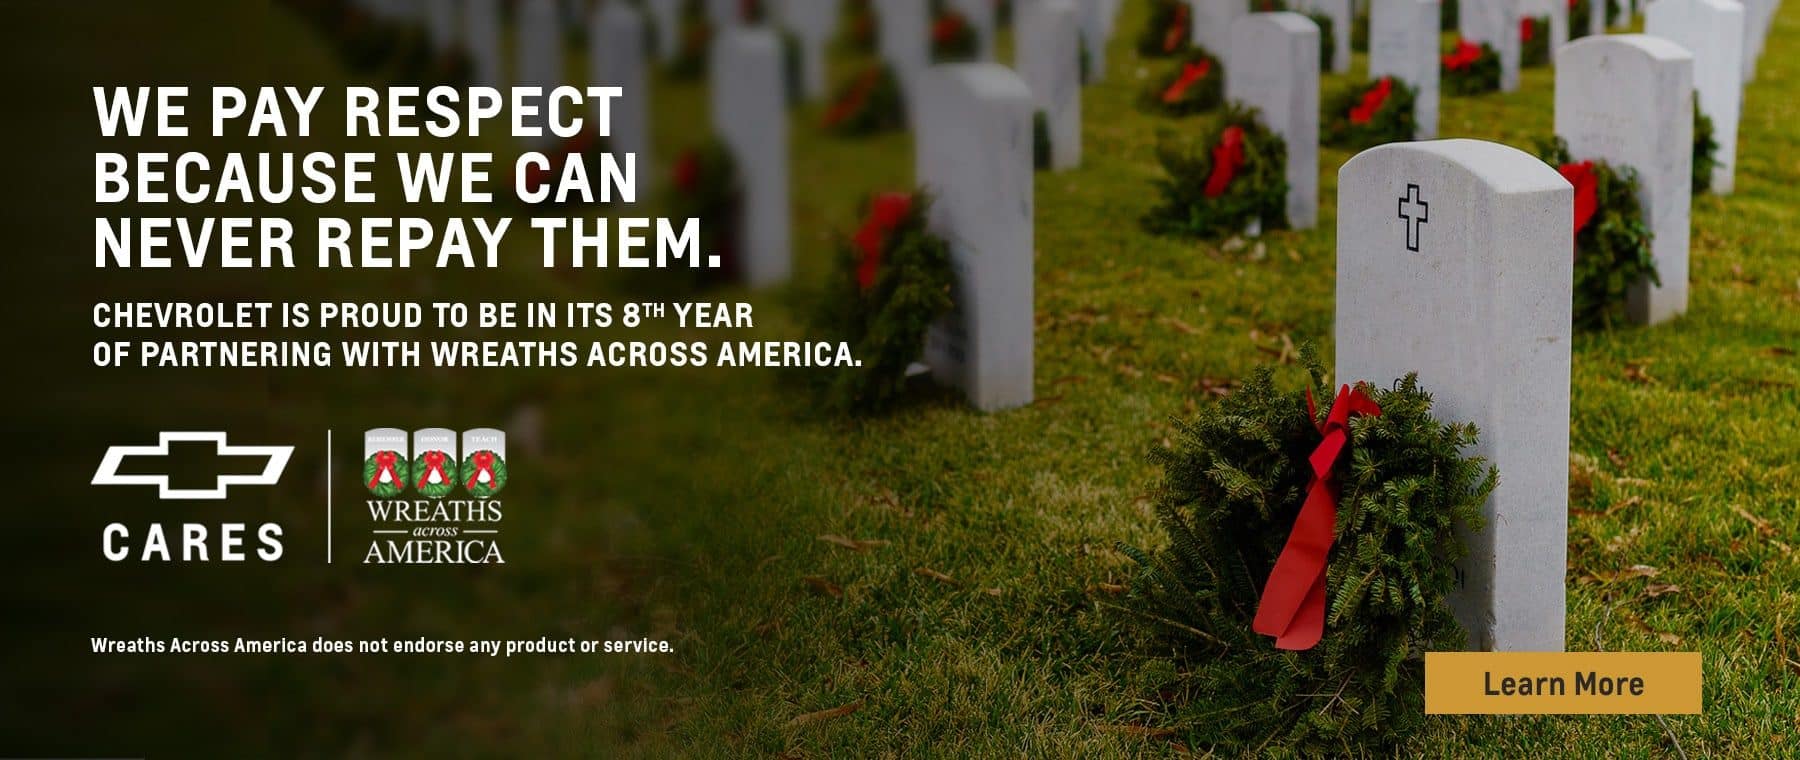 We pay respect because we can never repay them. Chevrolet is proud to be in its 8th year of partnering with Wreaths Across America.